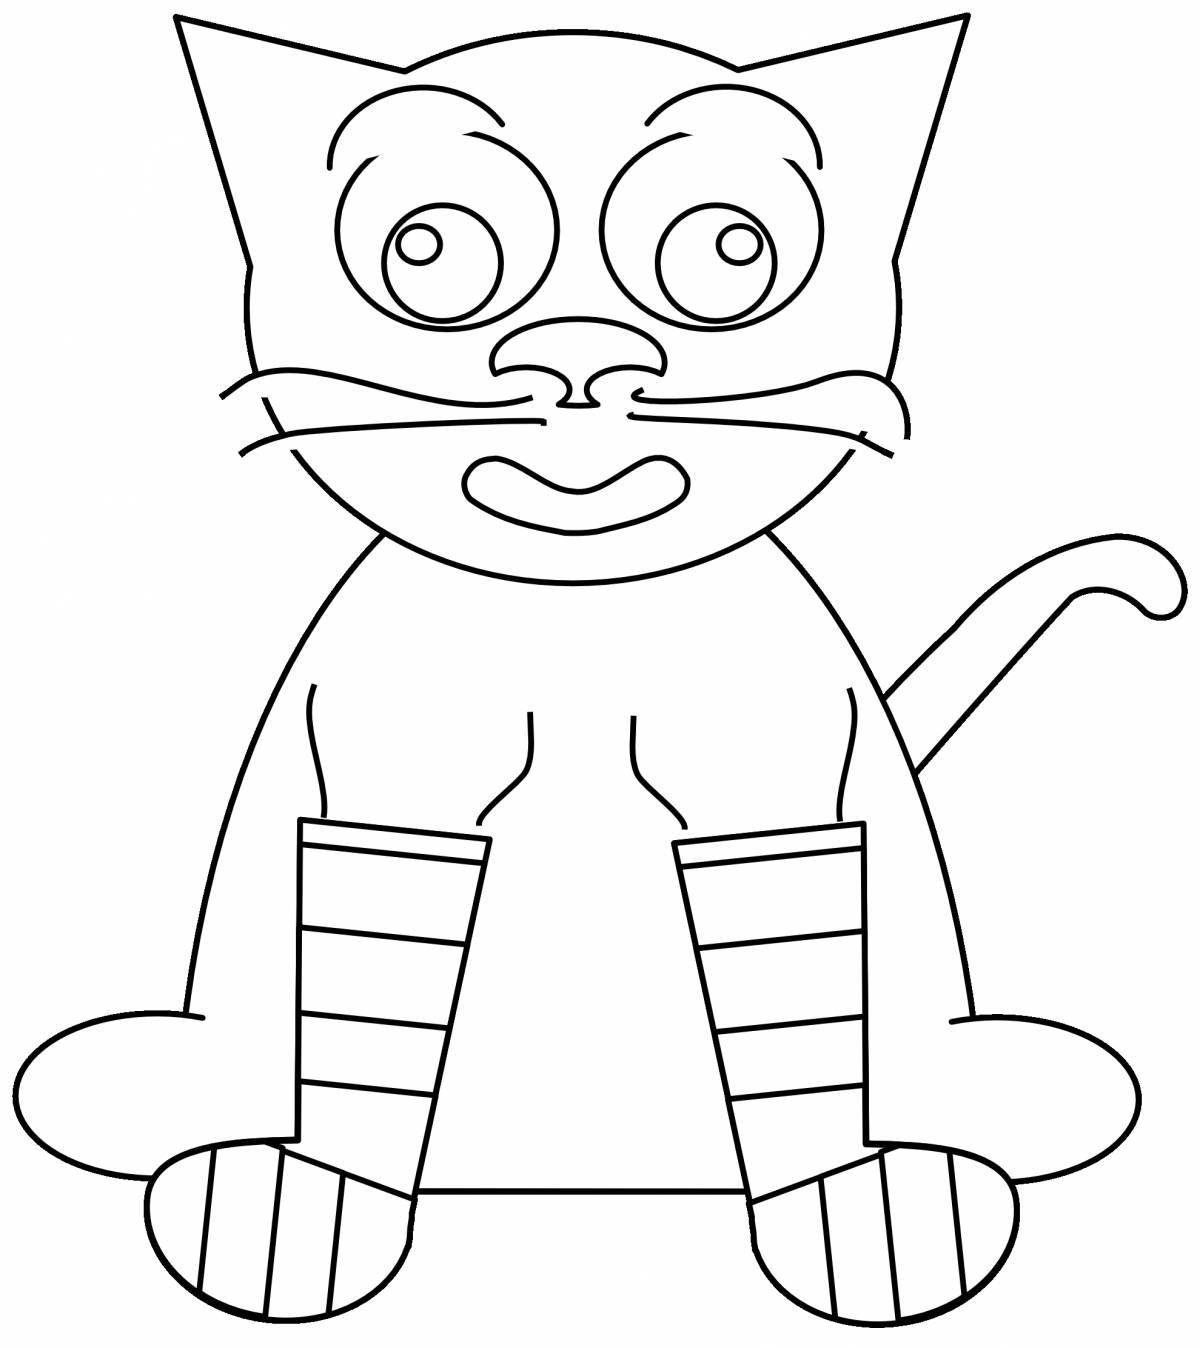 Amazing cartoon cat coloring book for kids